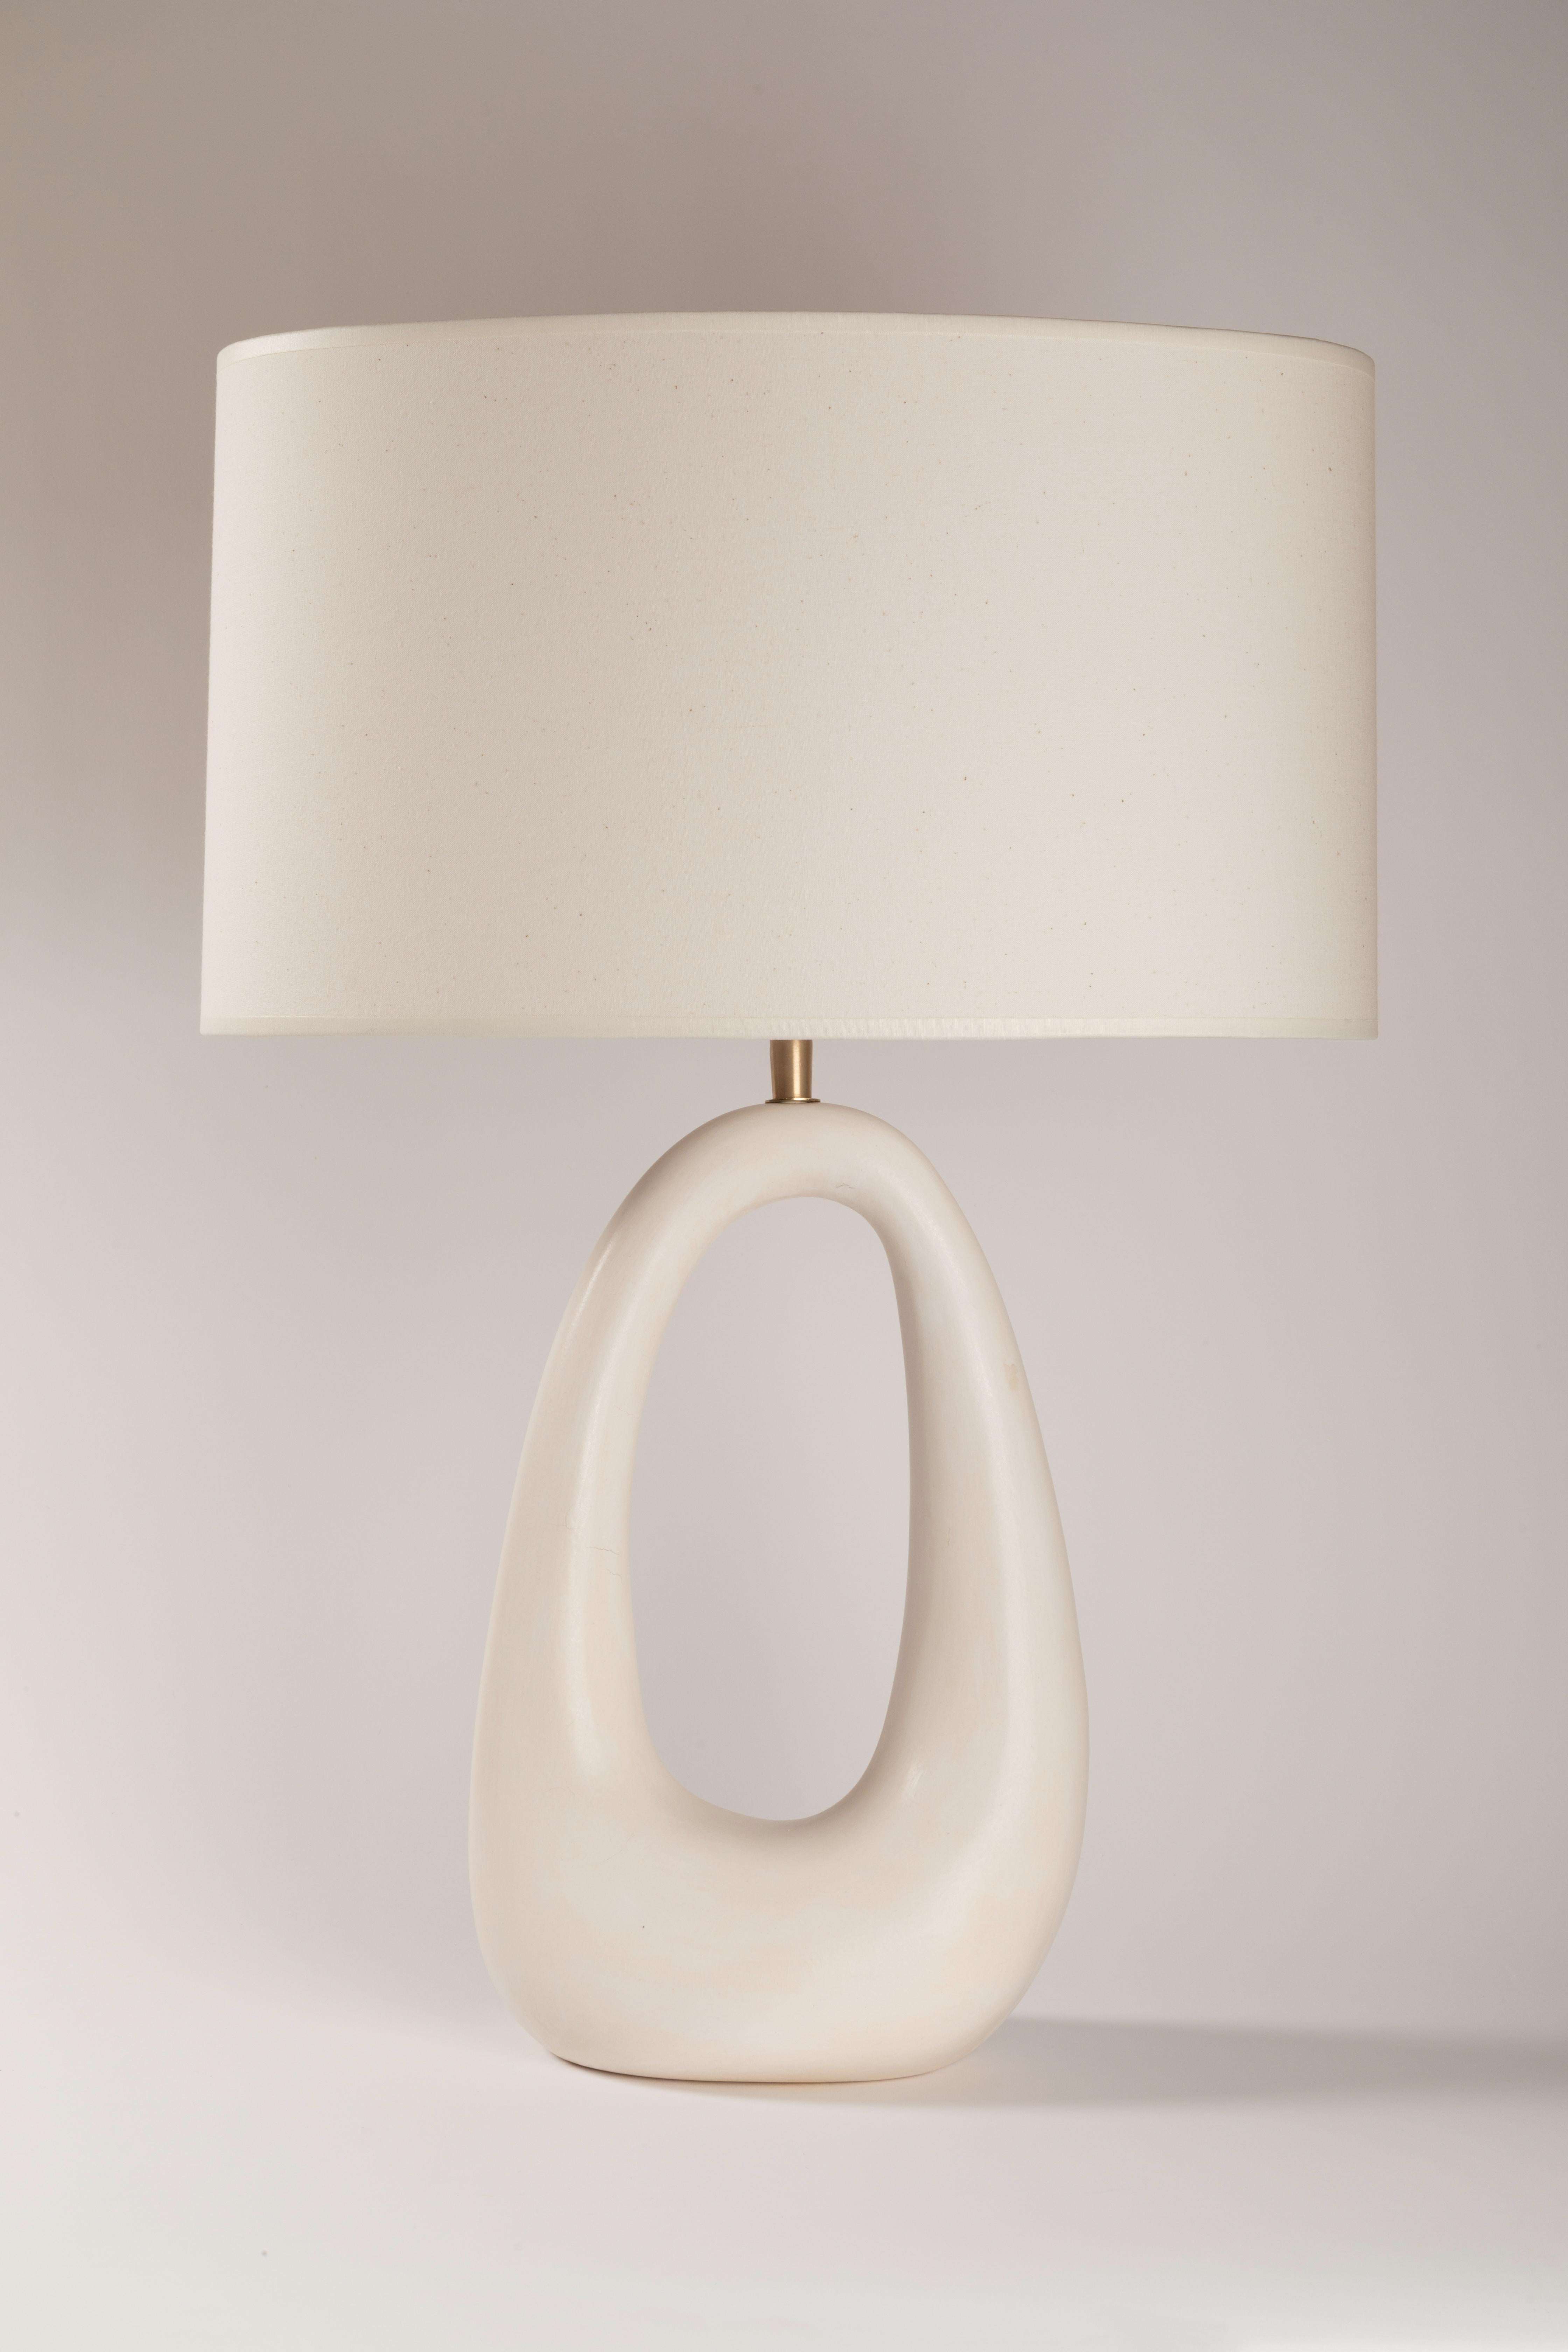 Hypnos table lamp by Elsa Foulon
Dimensions: D 64 x H 41 cm 
Materials: Ceramic, Brass, Linen
Unique Piece
Also available in different finishes and dimensions.

All our lamps can be wired according to each country. If sold to the USA it will be